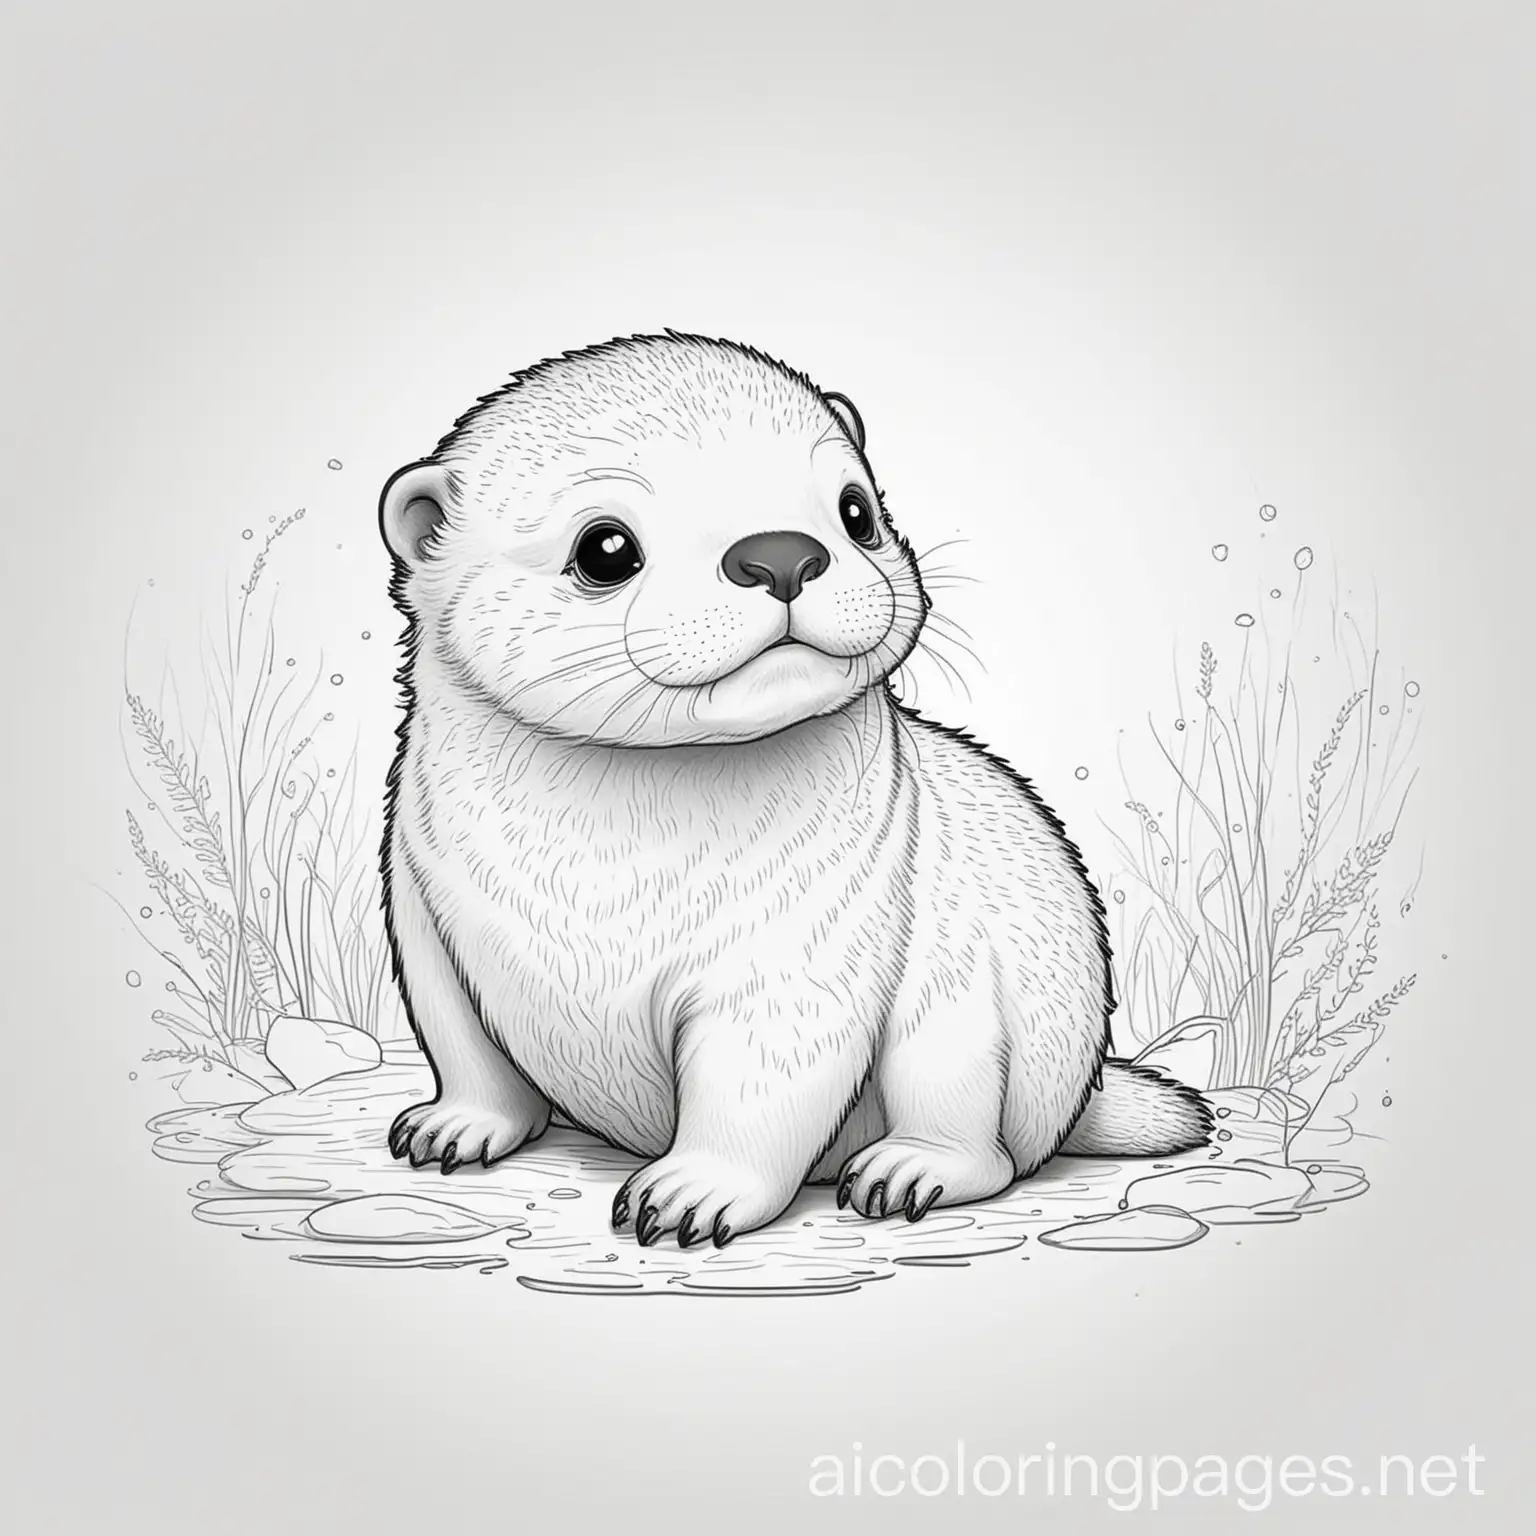 Coloring-Page-of-a-Cute-Baby-Otter-Black-and-White-Line-Art